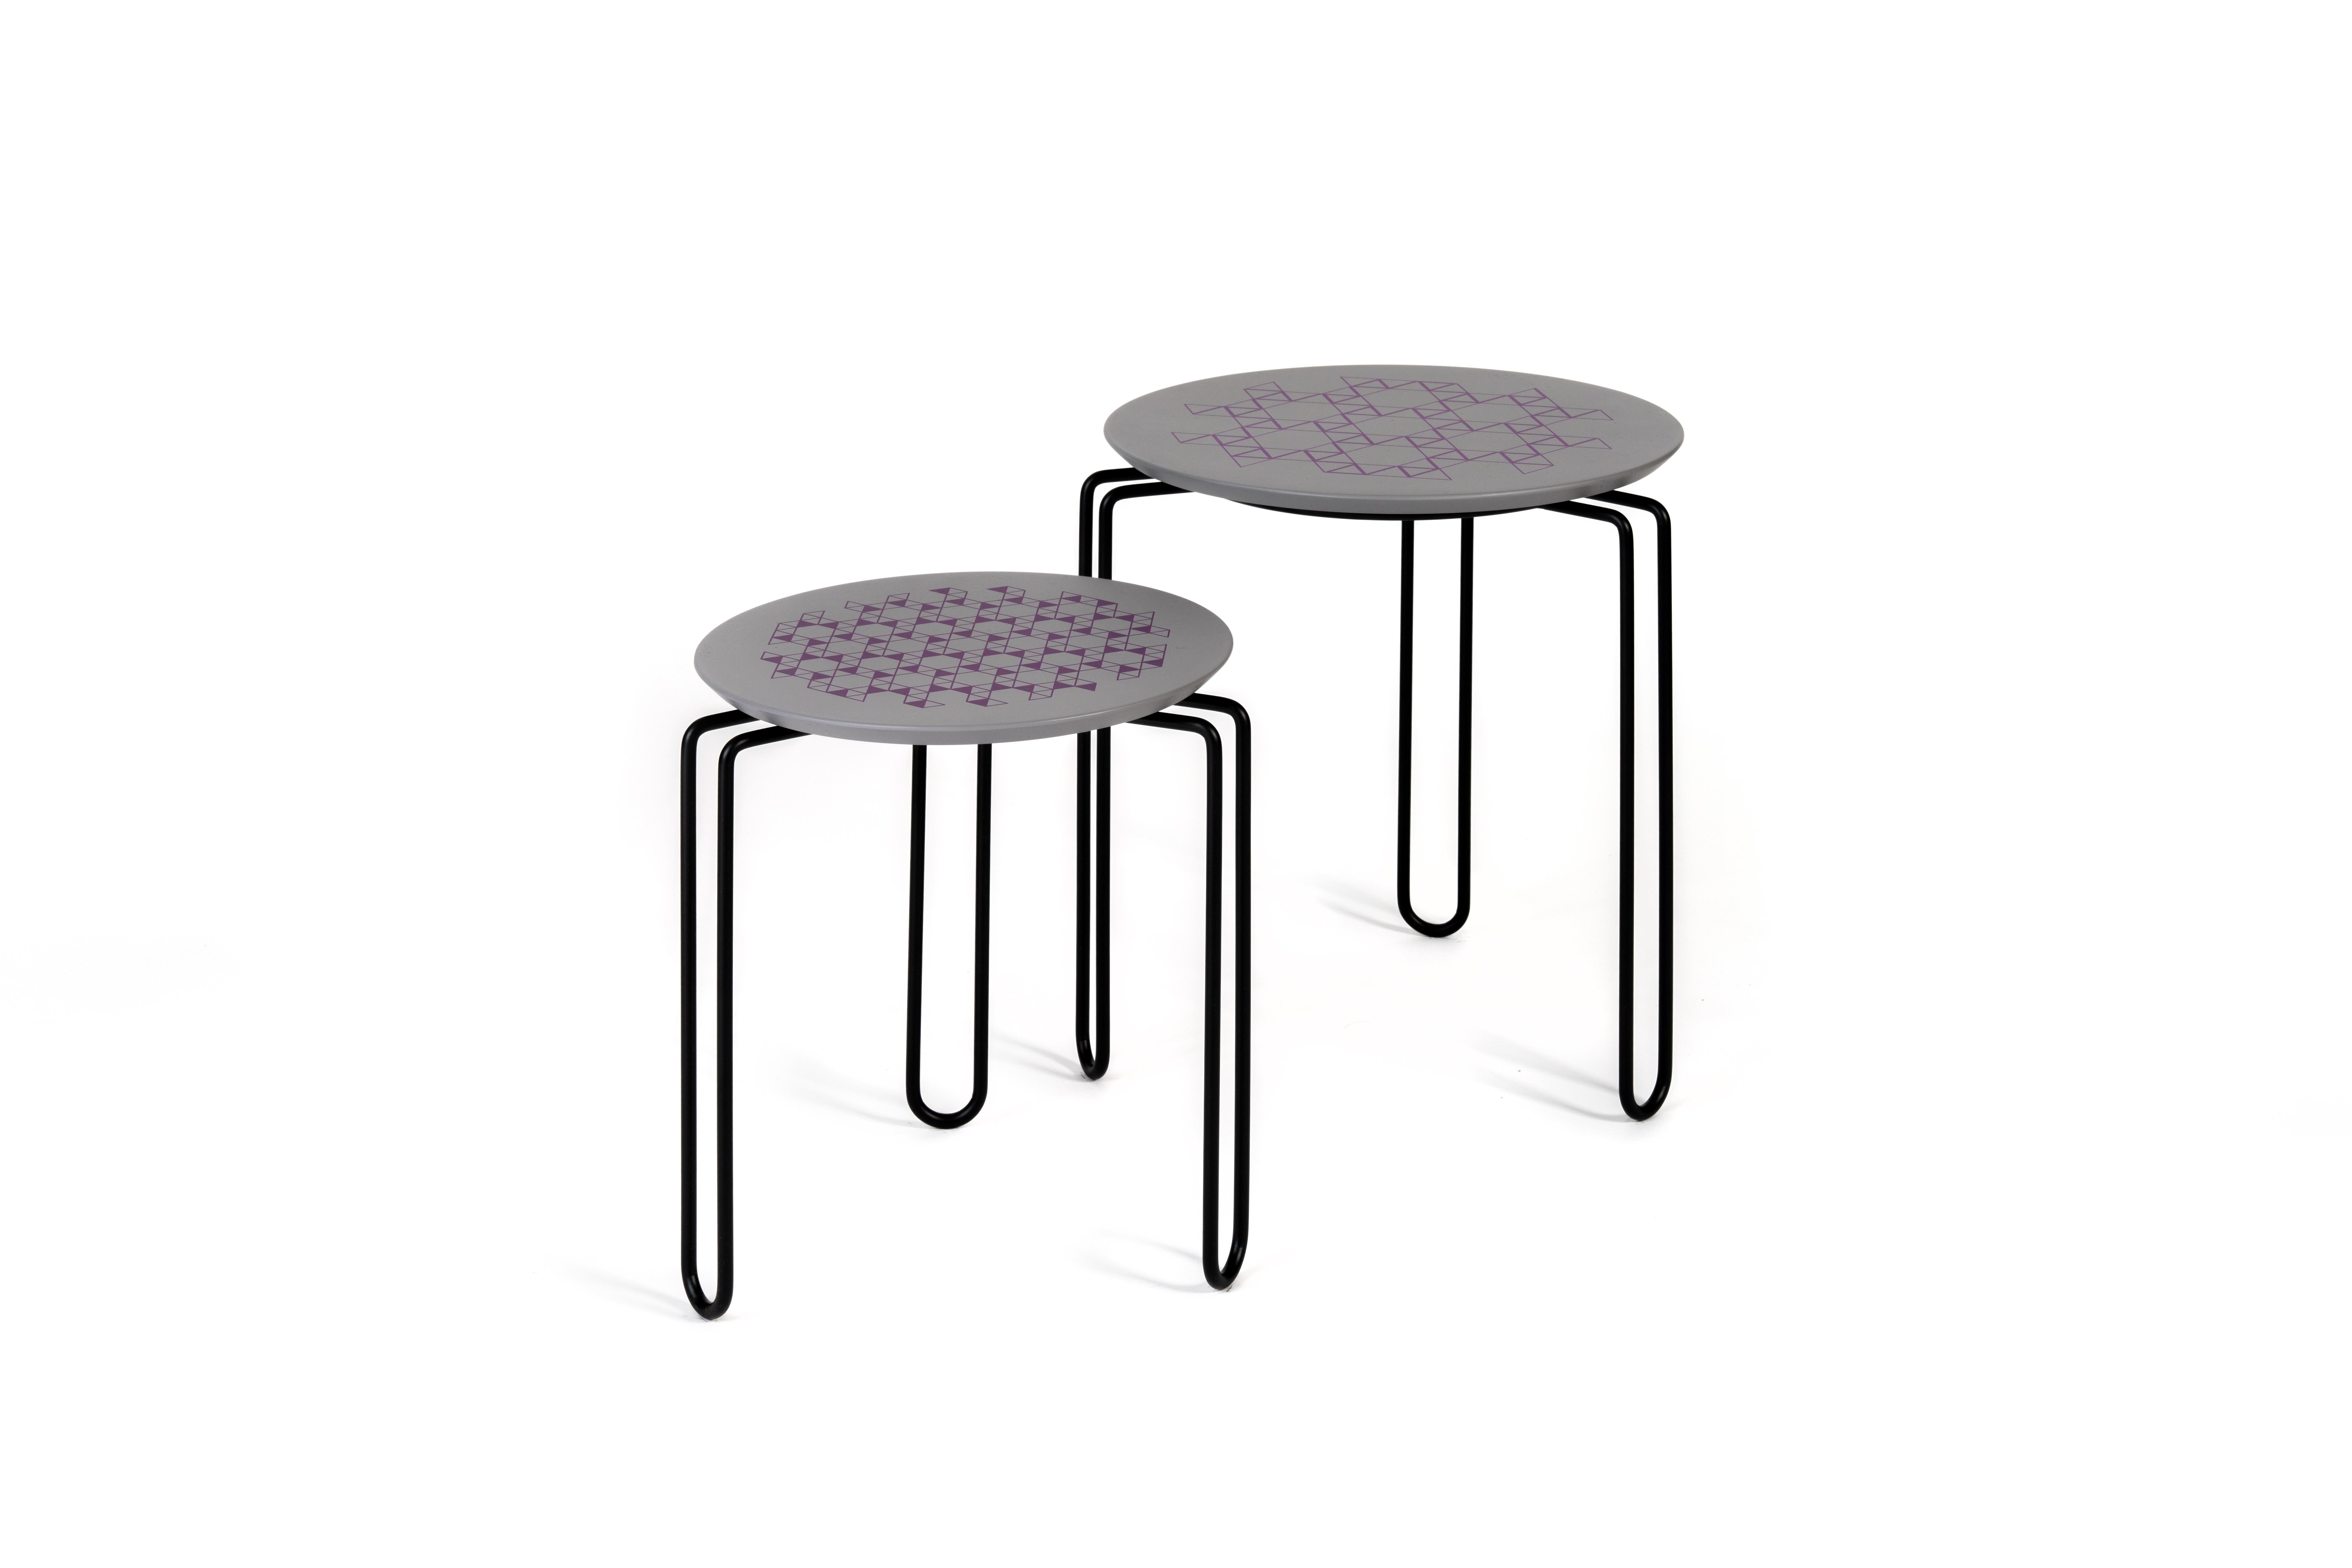 Set of 2 caleido coffee table by Mentemano
Dimensions: 
42 x H 47 cm
35 x H 41 cm
Materials: Steel, wood.


A bended steel structure of curves with three double legs. The circular stand top is made of lacquered wood and enriched with digital